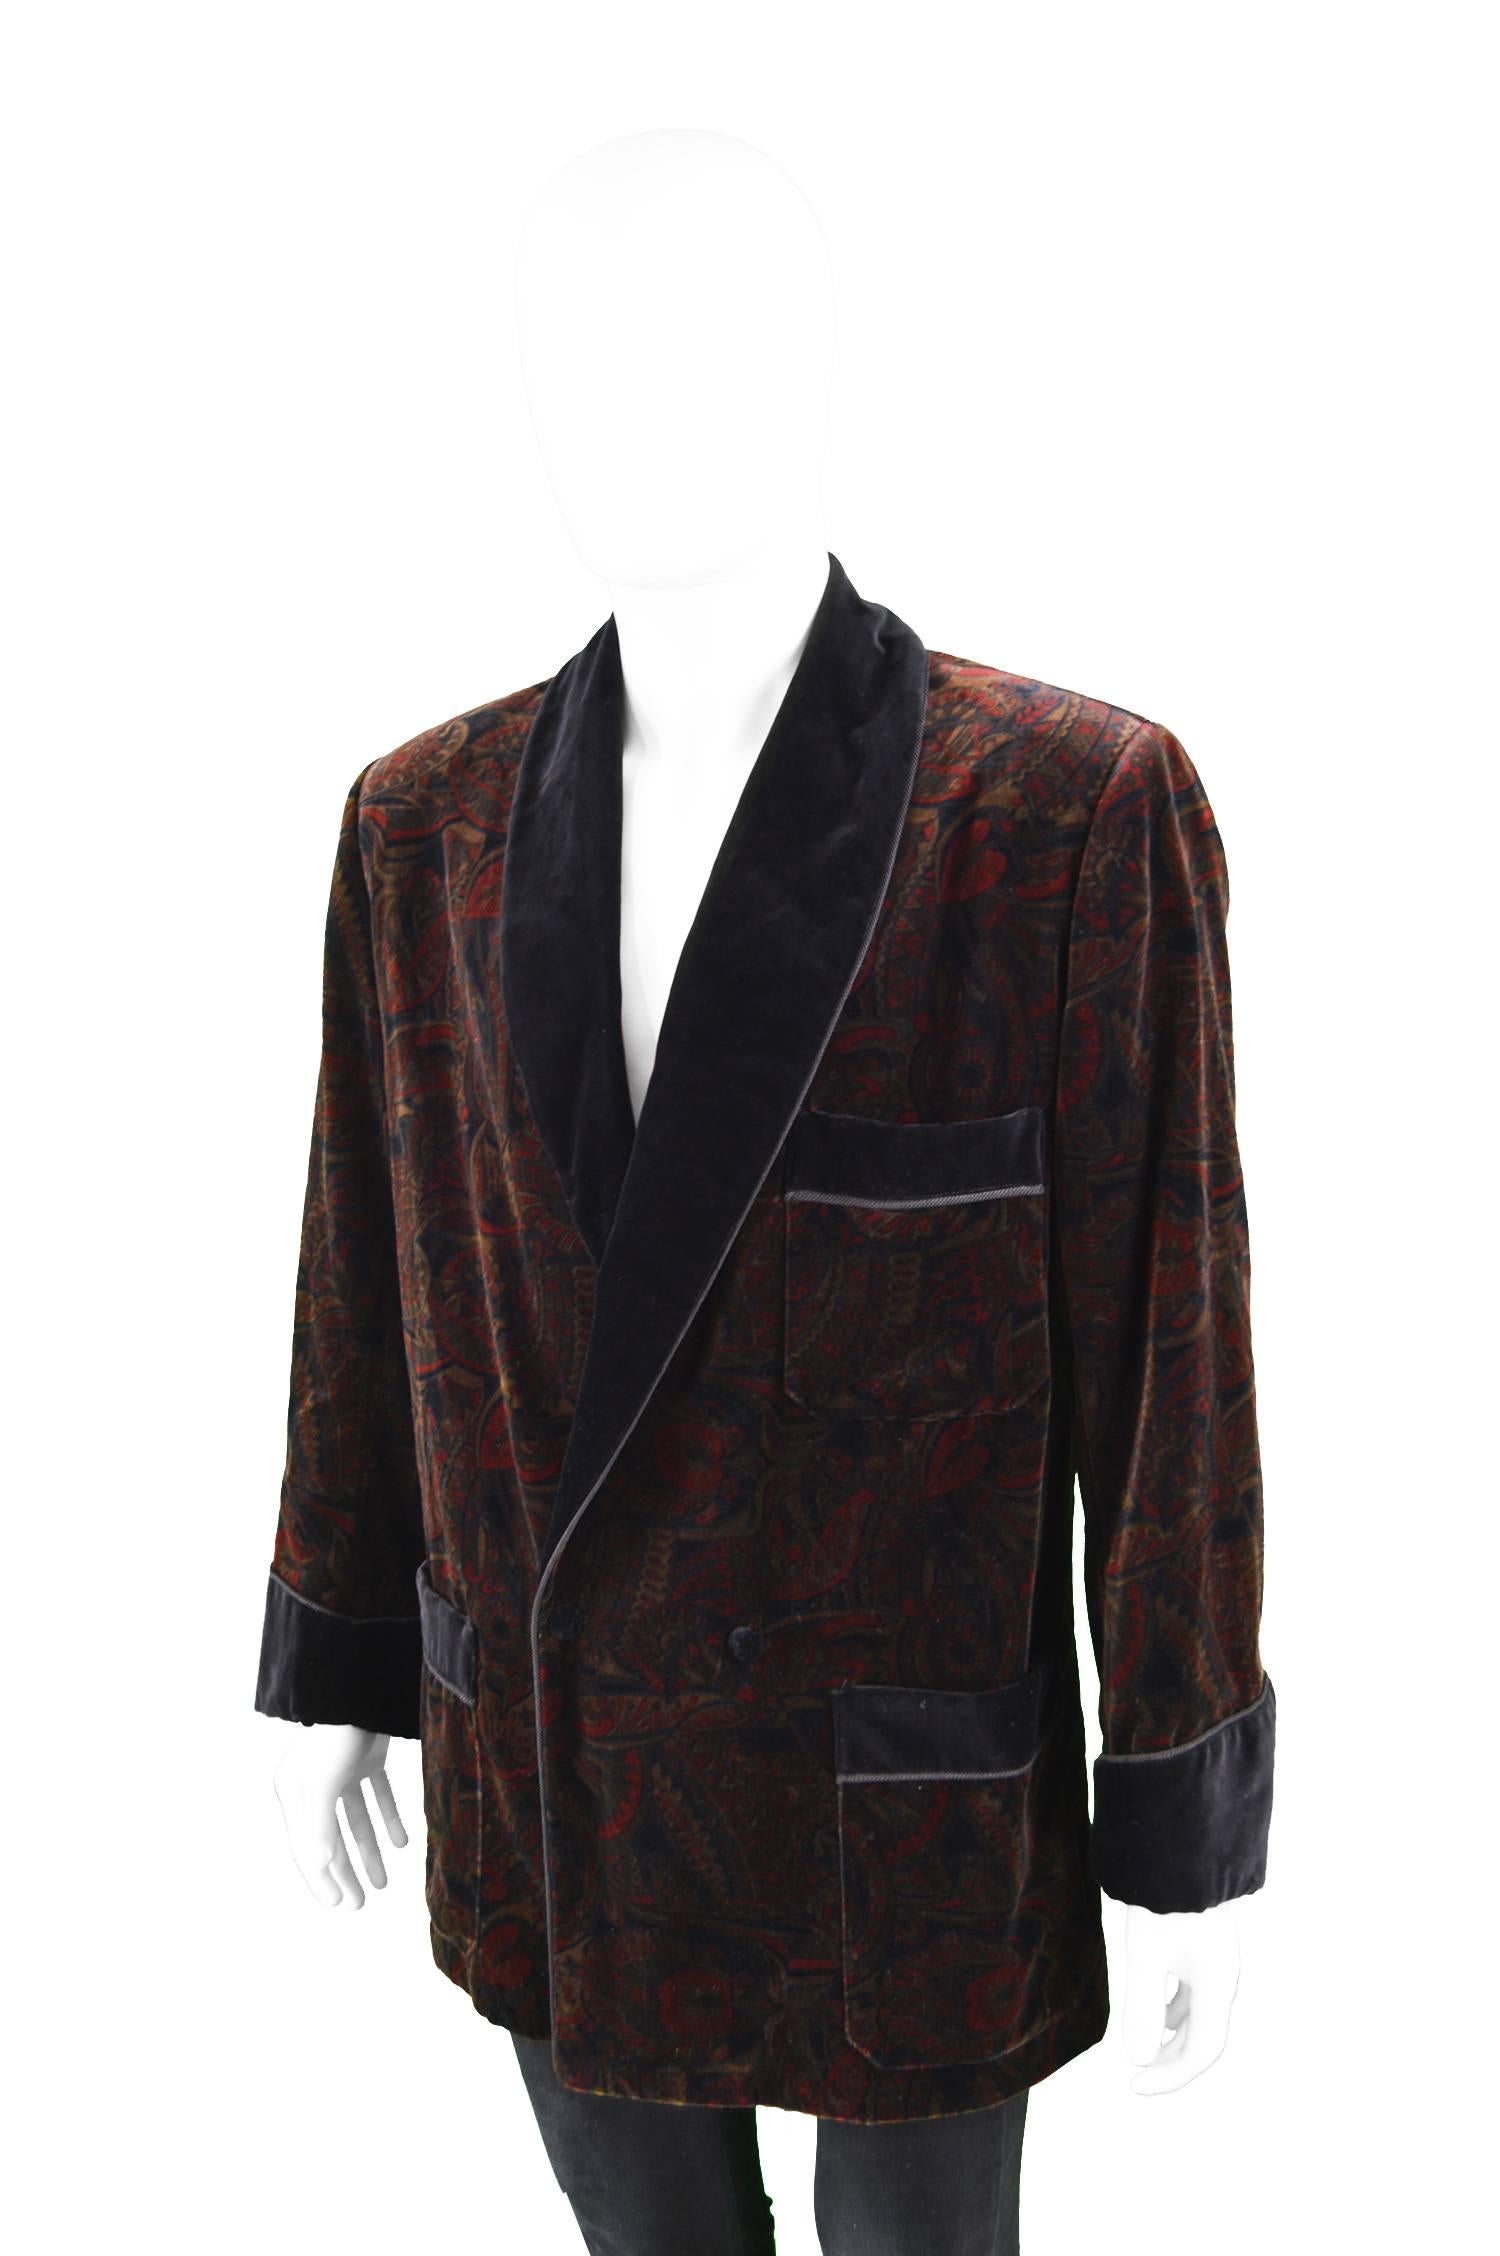 Men's Vintage Paisley Print Velvet Smoking Jacket with Braided Lapels, 1980s For Sale 1